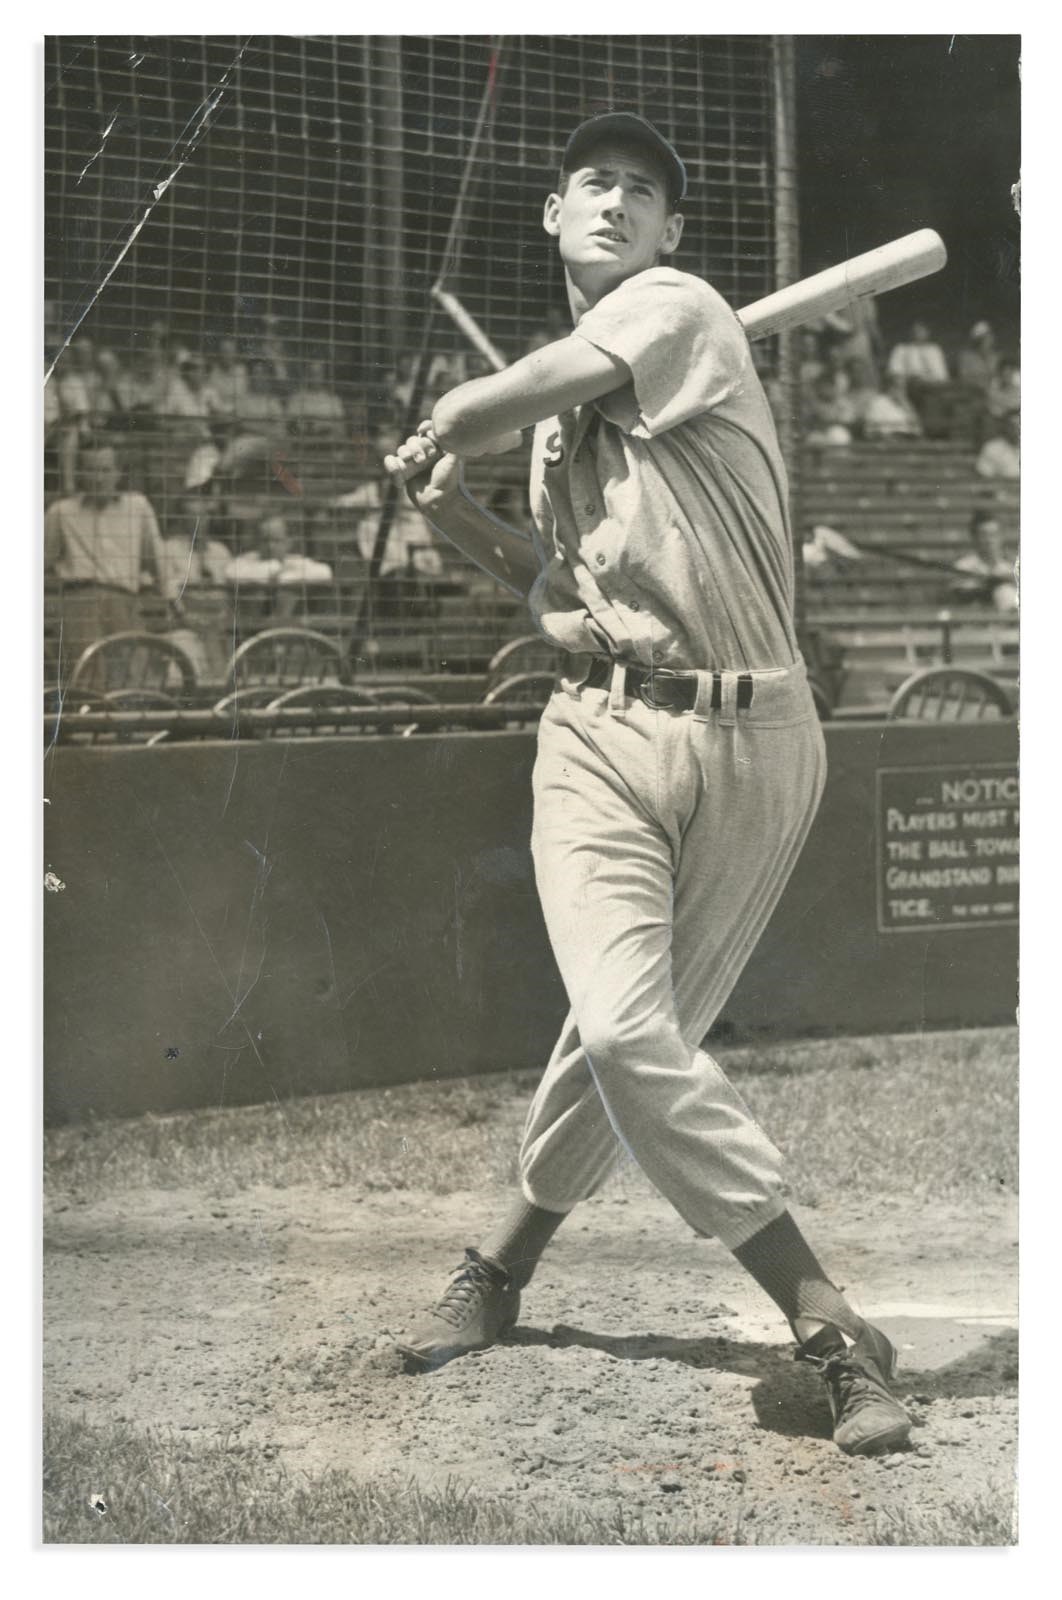 Vintage Sports Photographs - Ted Williams Rookie Era Type 1 Photograph